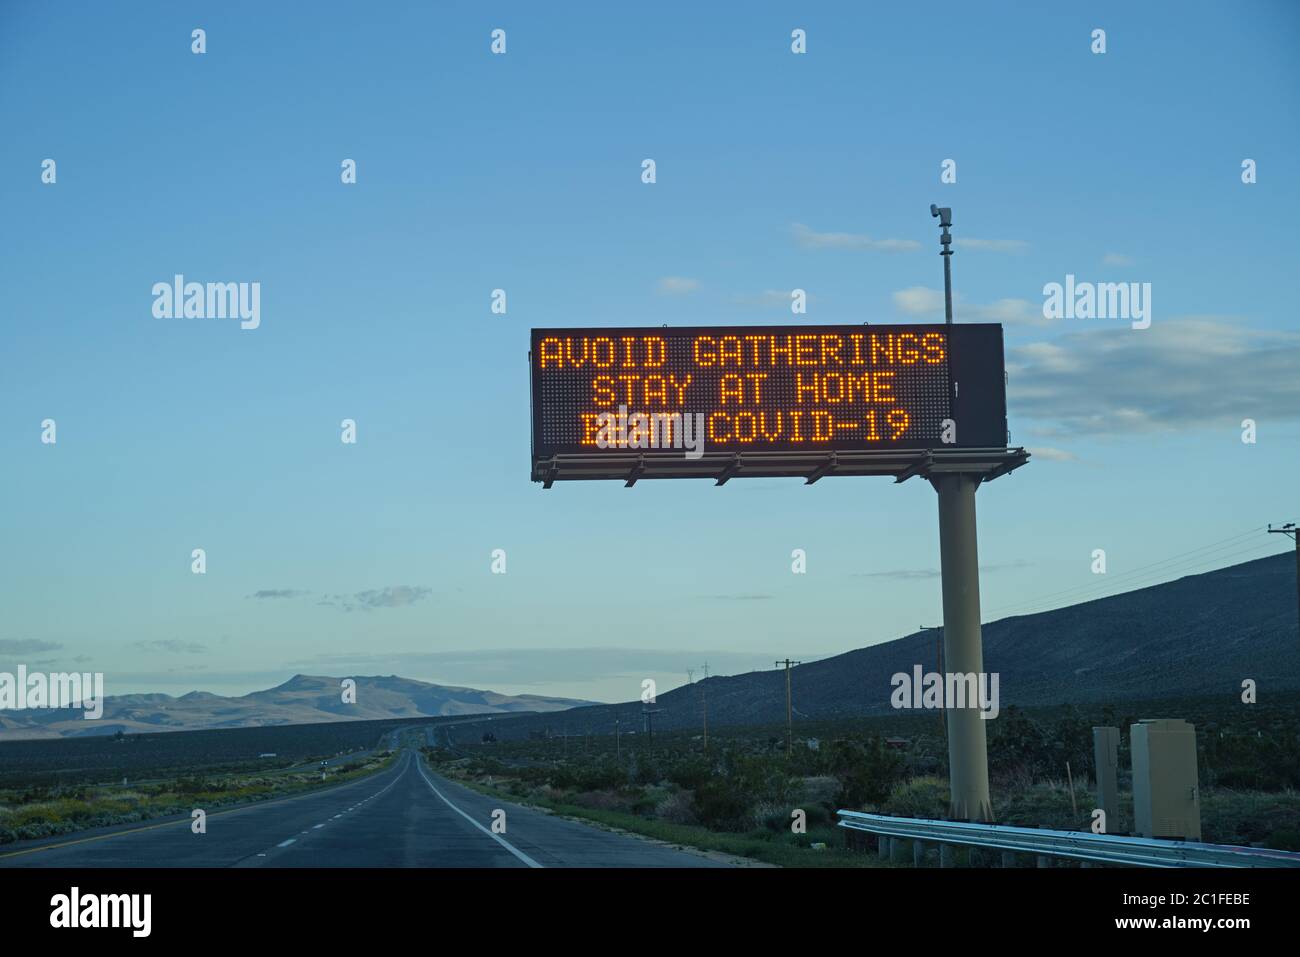 avoid gatherings stay at home beat COVID-19 highway sign near dusk Stock Photo